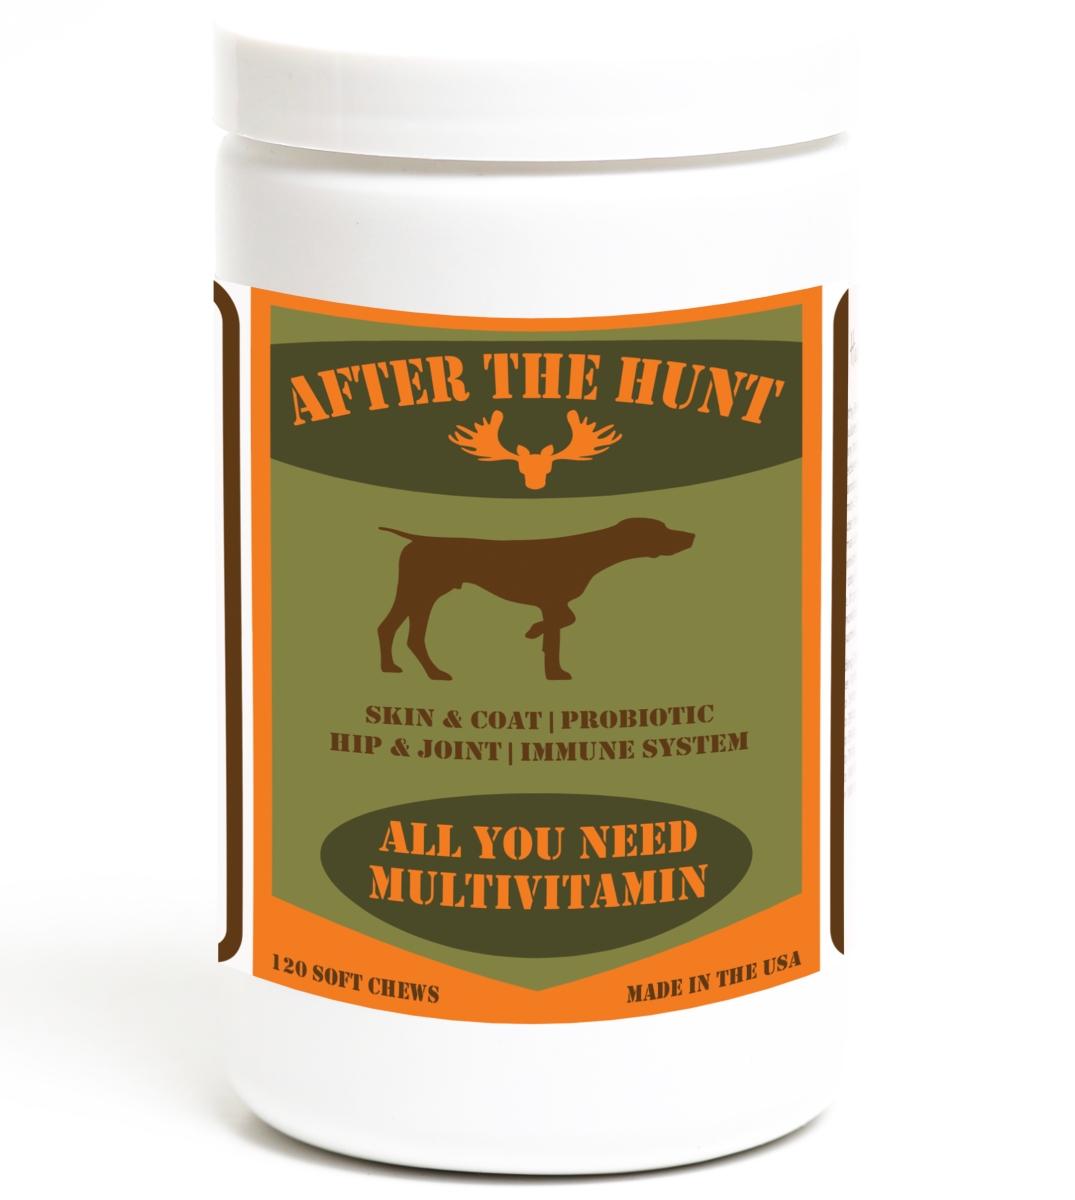 Picture of After the Hunt 192959899702 All You Need Complete Dog Multivitamin with Daily Vitamins for Skin & Coat Hip & Joint Digestion & Immune System for Glucosamine Omega 3 6 9 & Probiotics - 120 Count